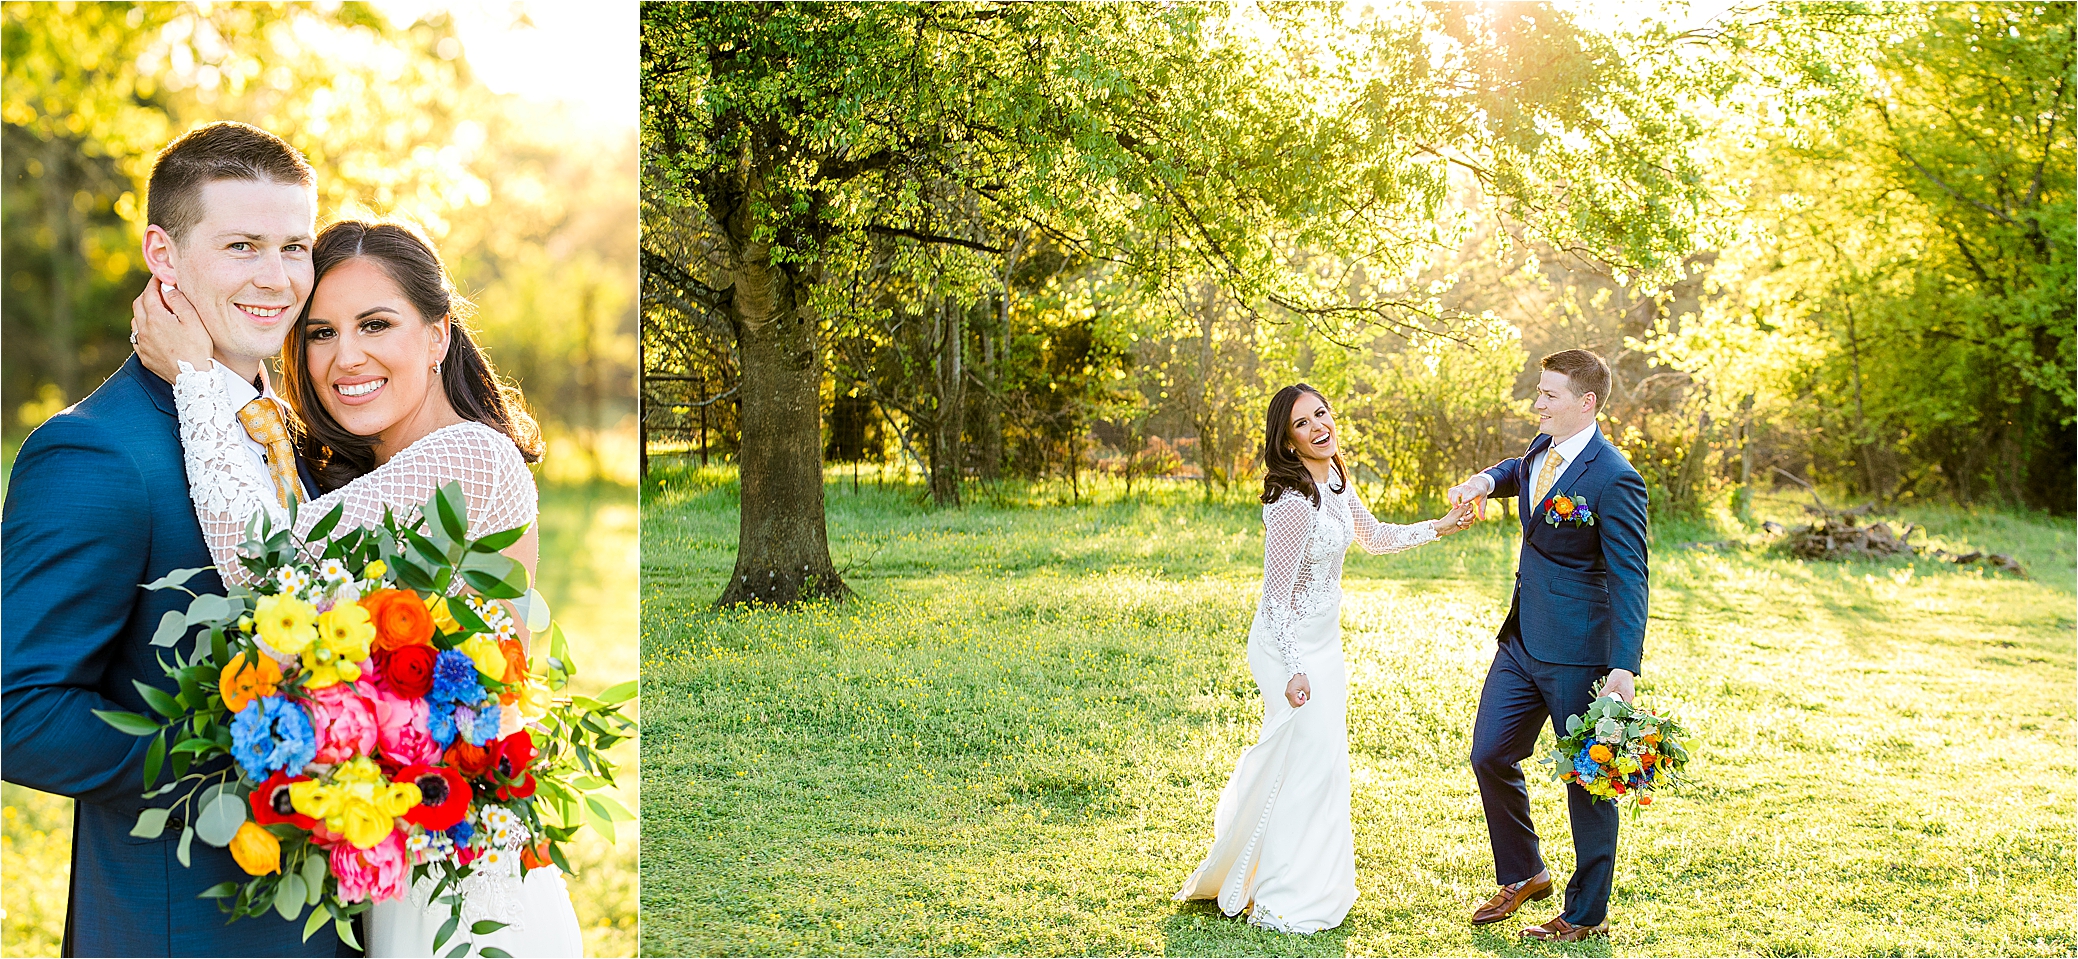 A couple embraces and shares a dance during their wedding day portraits at sunset 